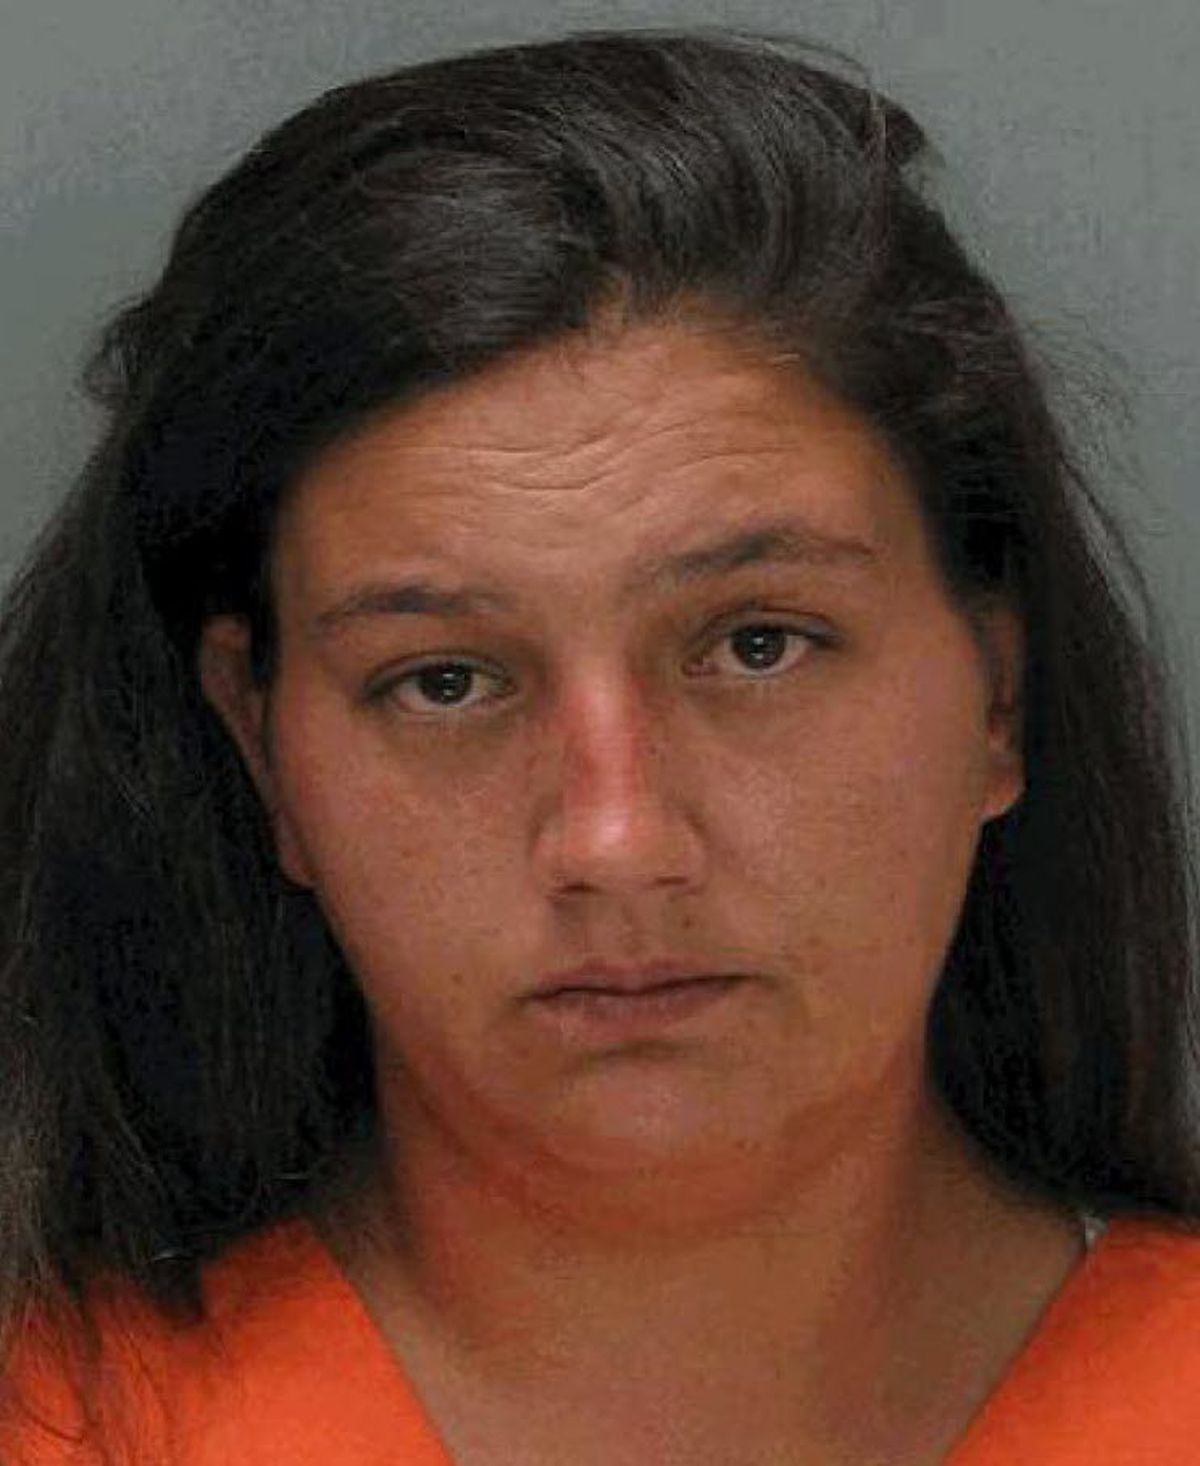 Melissa Jenkins, 30, is shown in this photo provided Tuesday Aug. 18, 2009 by the Ada County Jail,  Jenkins, the mother of Robert Manwill, was indicted on suspicion of first-degree murder by an Ada County grand jury in the death of her 8-year-old son. (Associated Press)